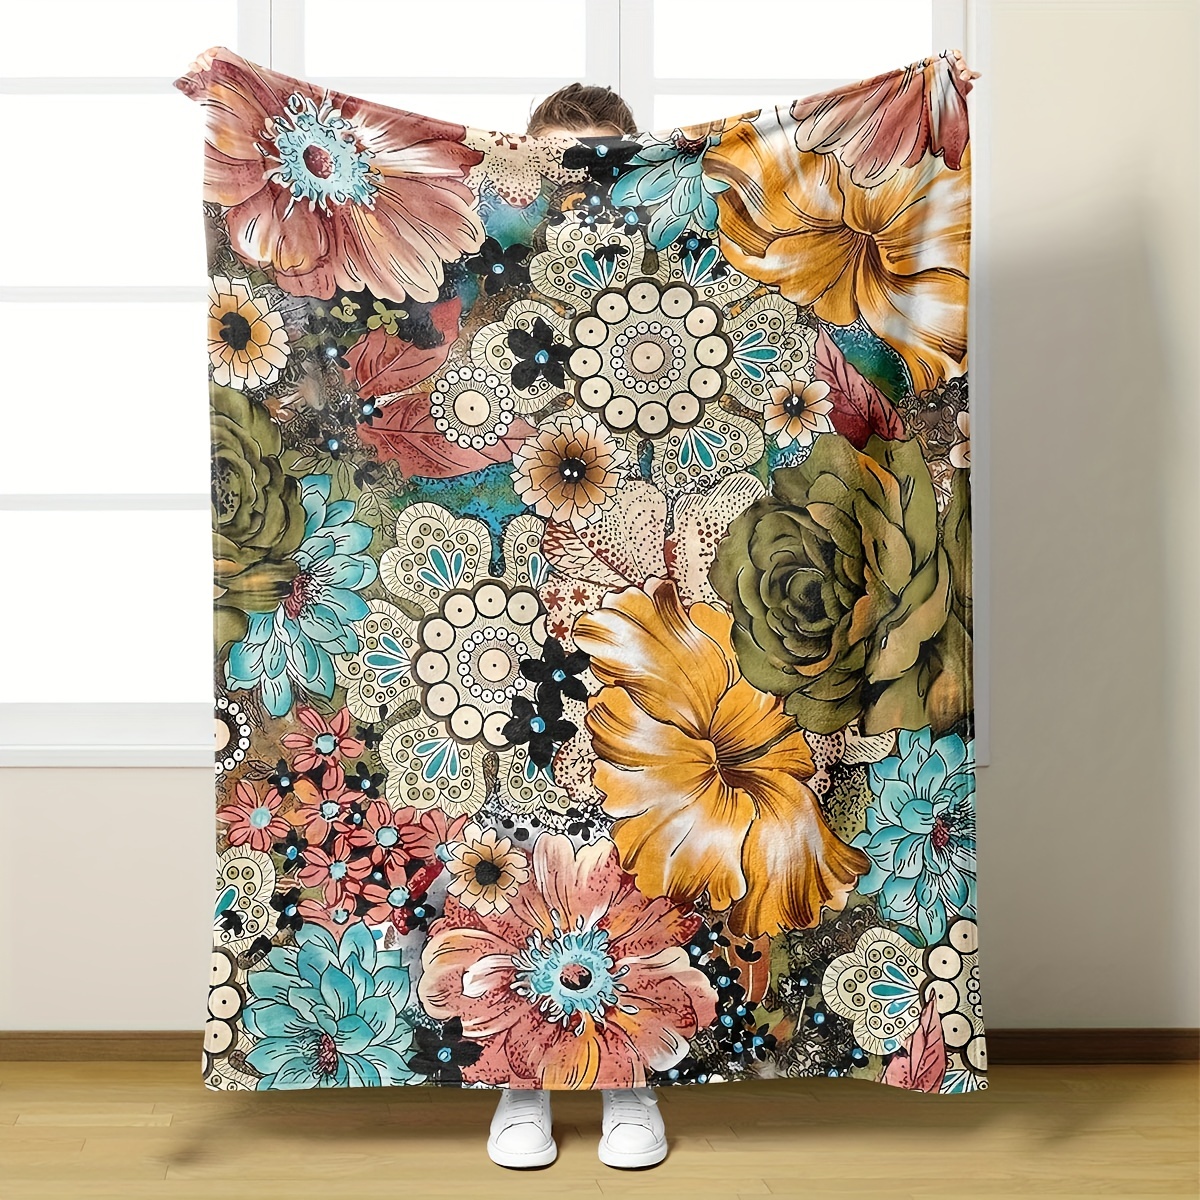 Watercolor Floral Bunch Comforter - Laural Home